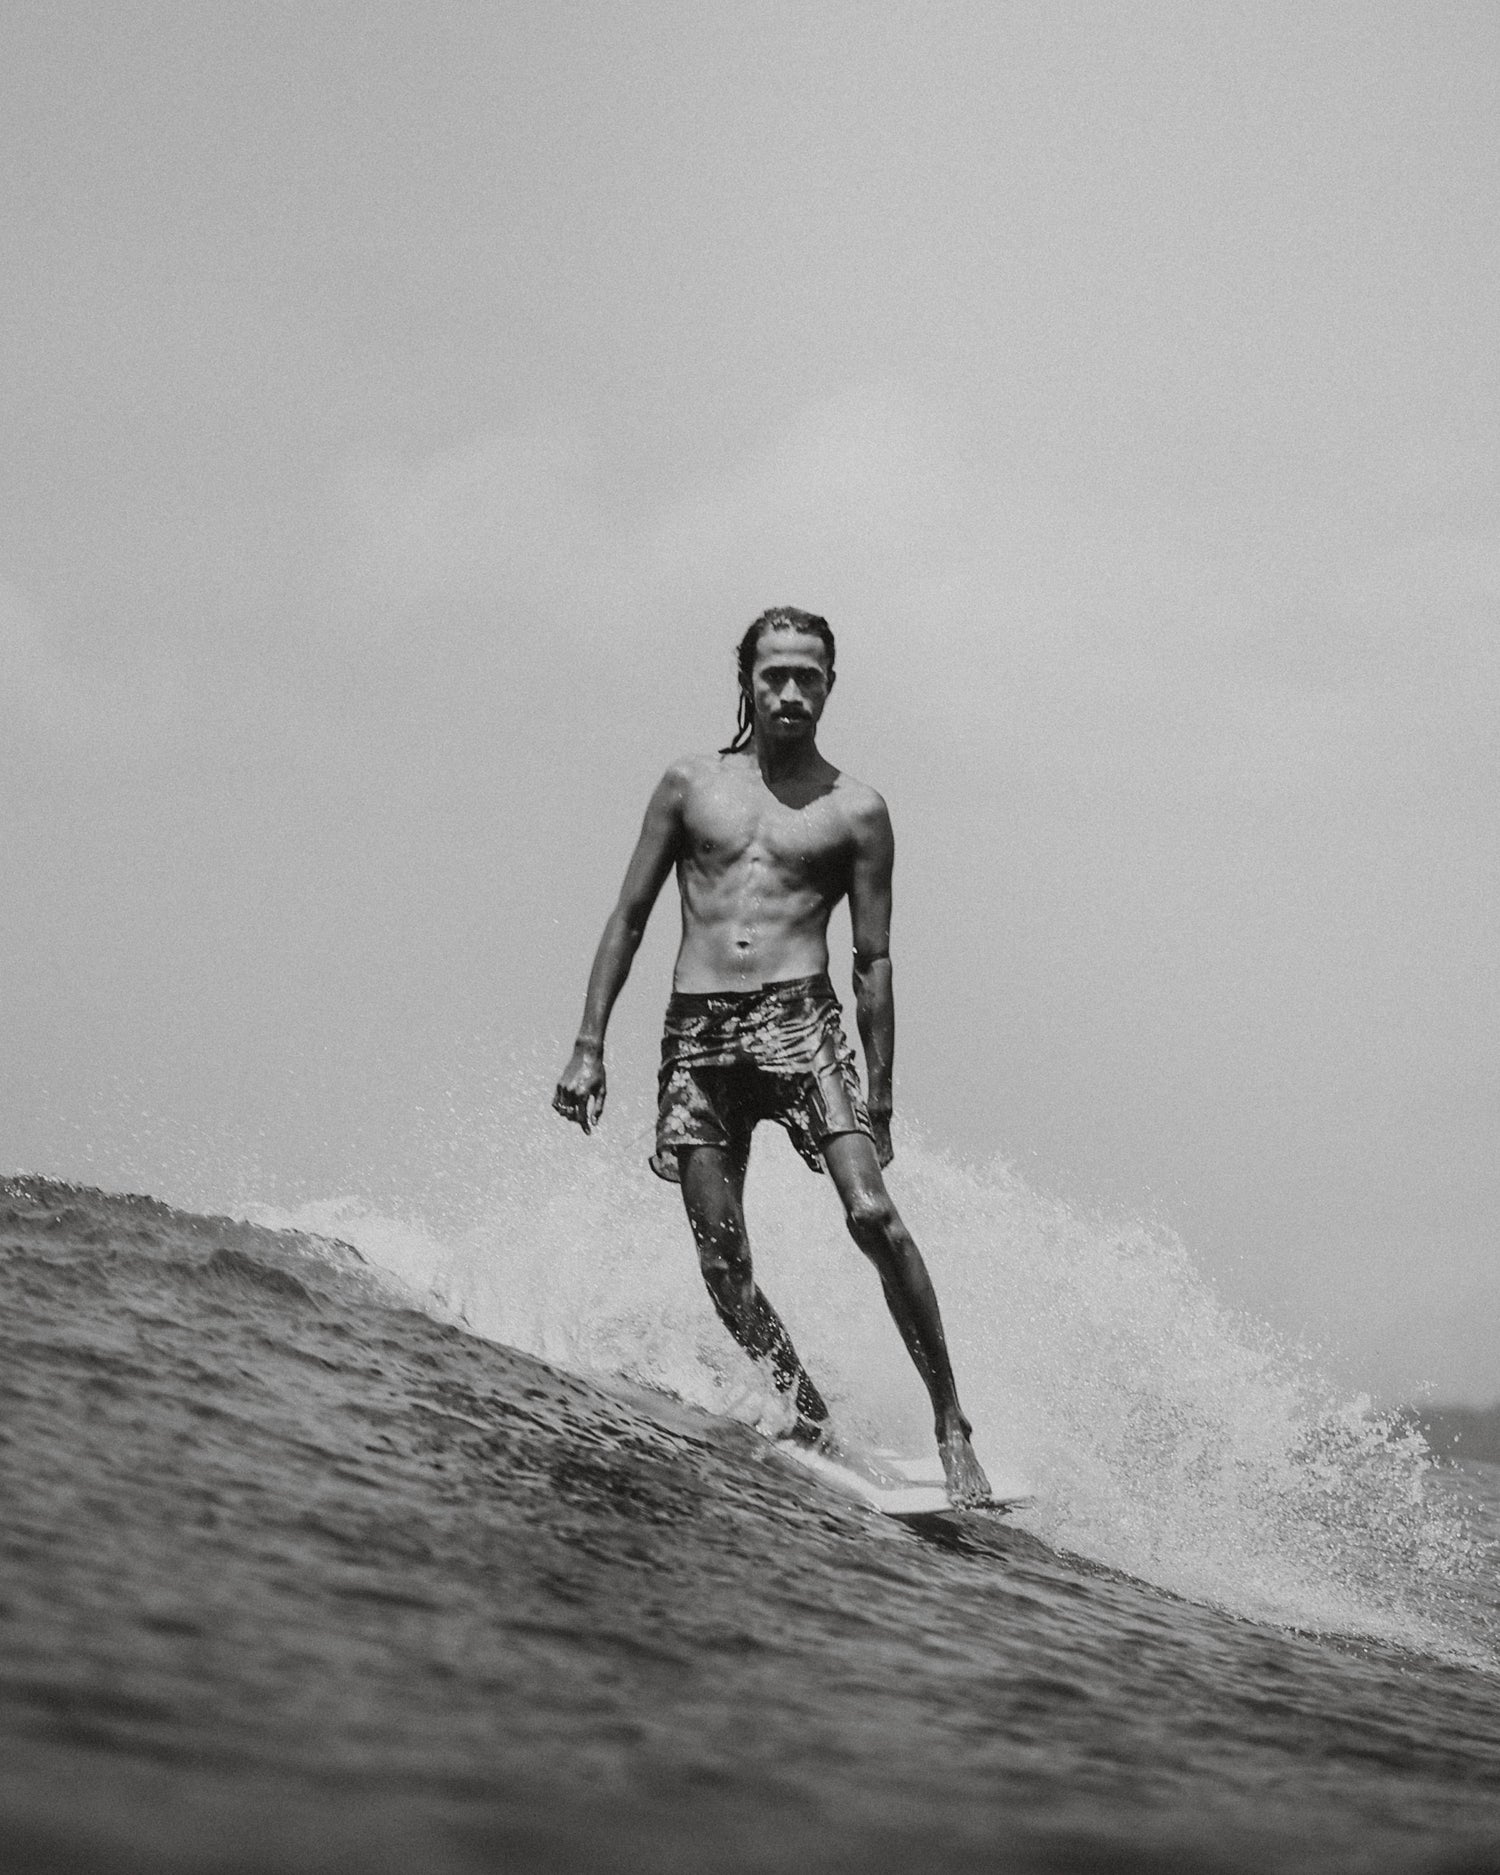 Black and white lifestyle image of a local Indonesian surfer longboarding at Inside Gerupuk on Lombok on a sunny warm day.